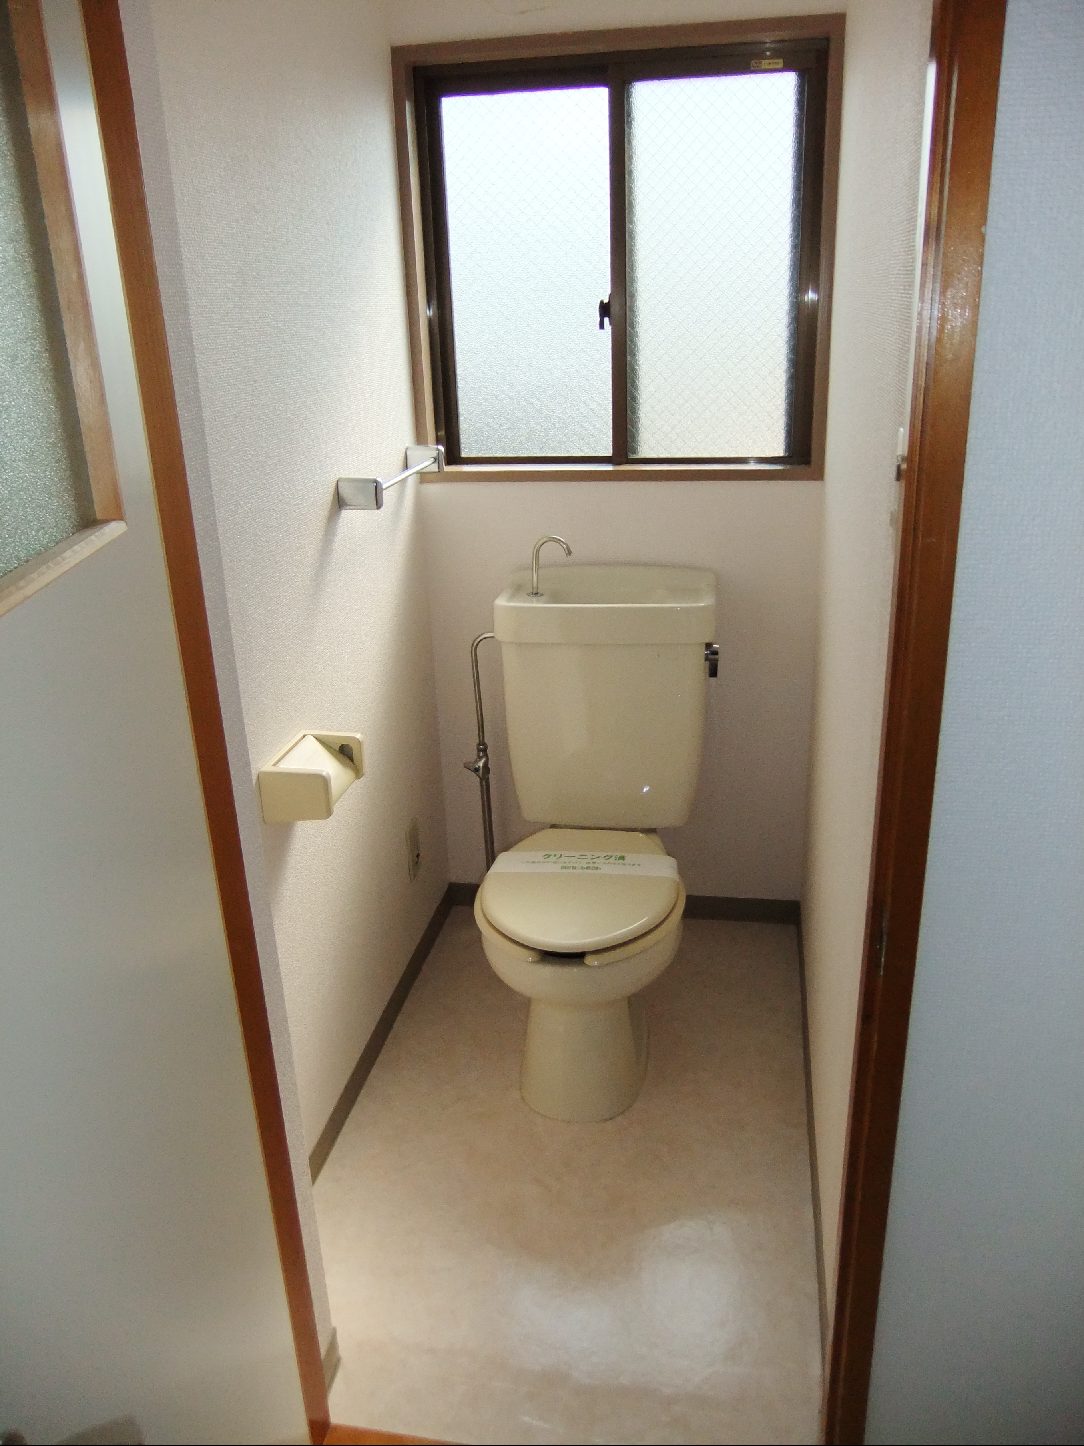 Toilet. Toilets are Western-style Even taste of Showa.